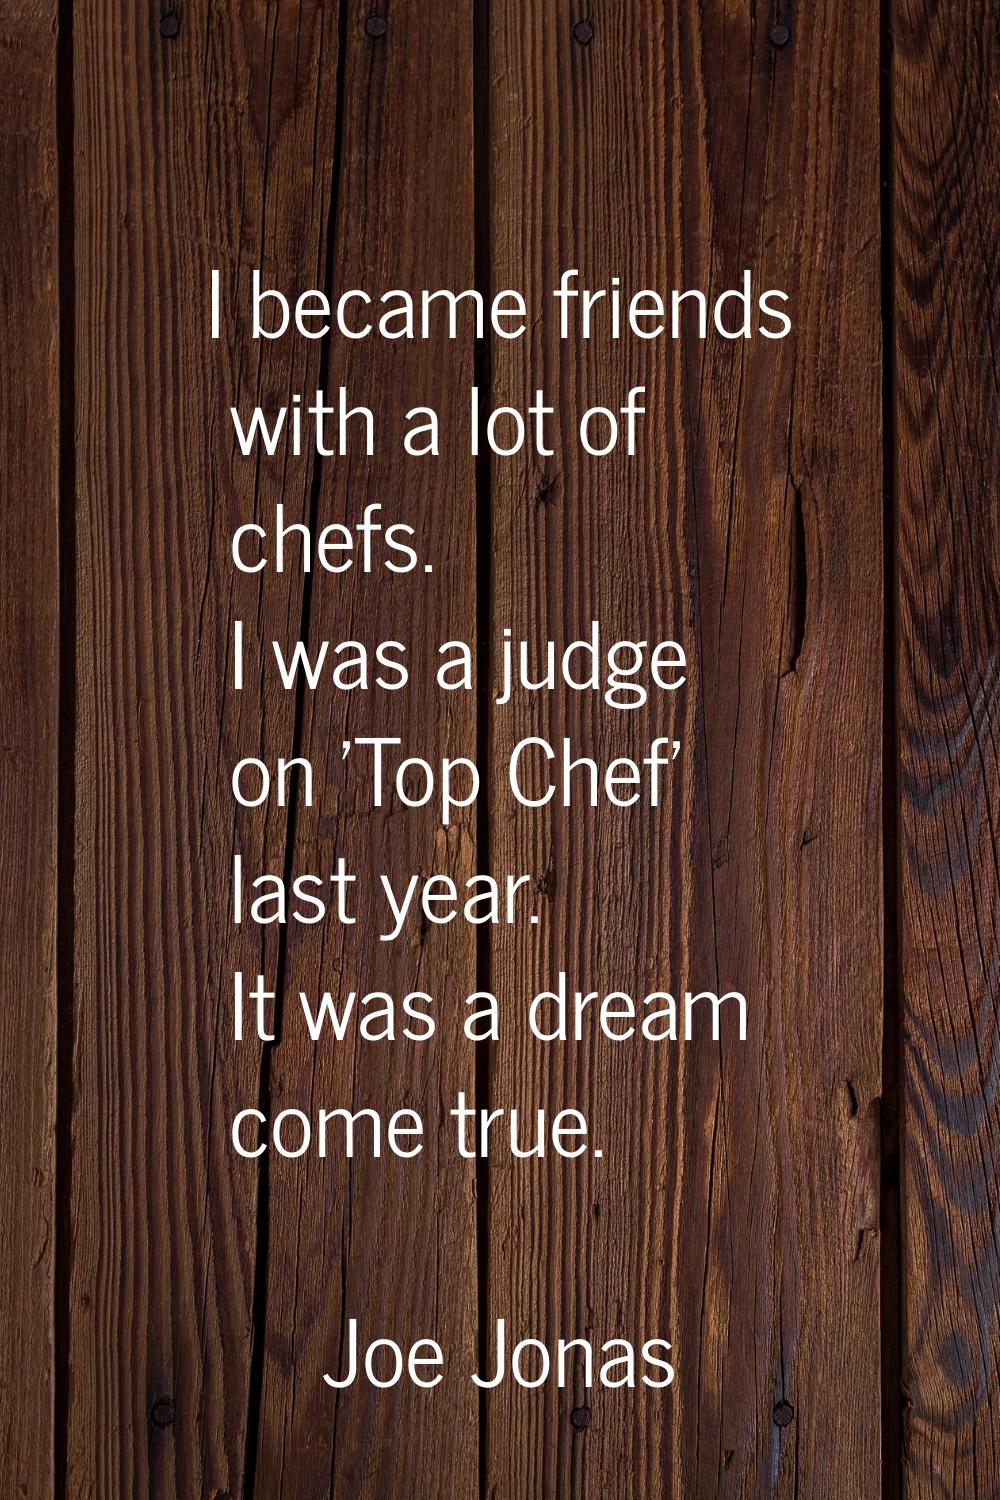 I became friends with a lot of chefs. I was a judge on 'Top Chef' last year. It was a dream come tr